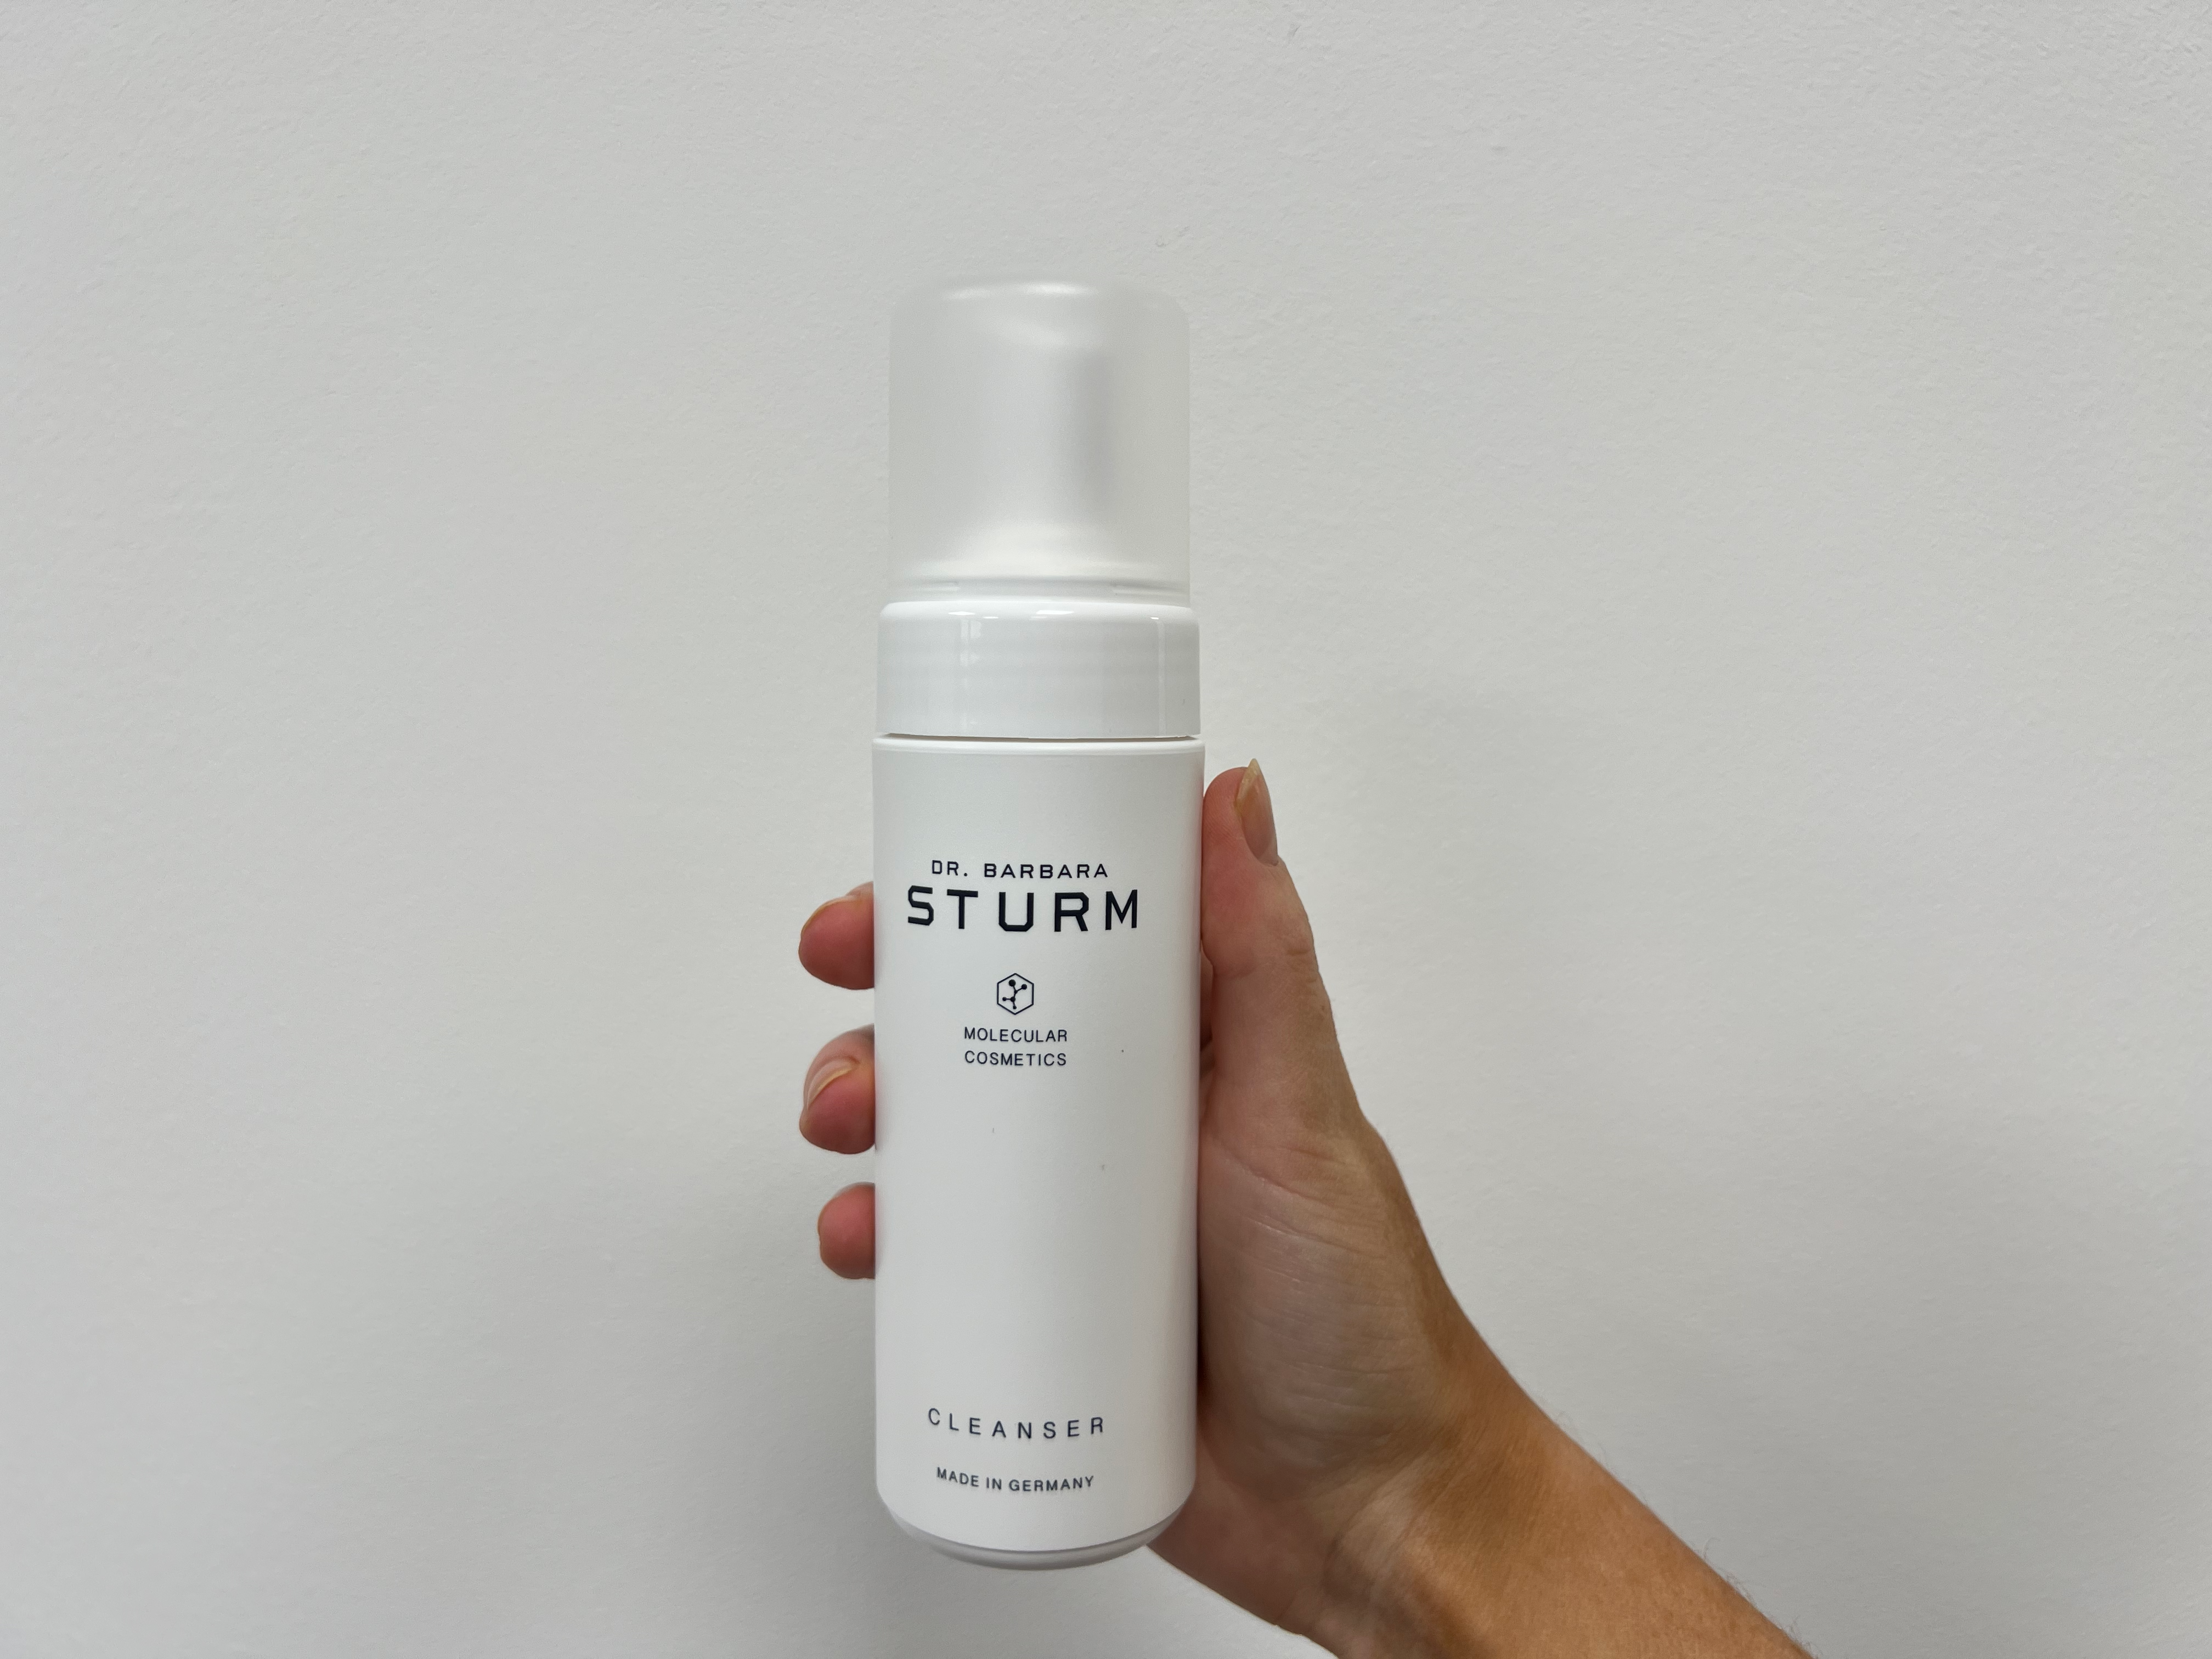 Dr. Barbara Sturm cleanser review